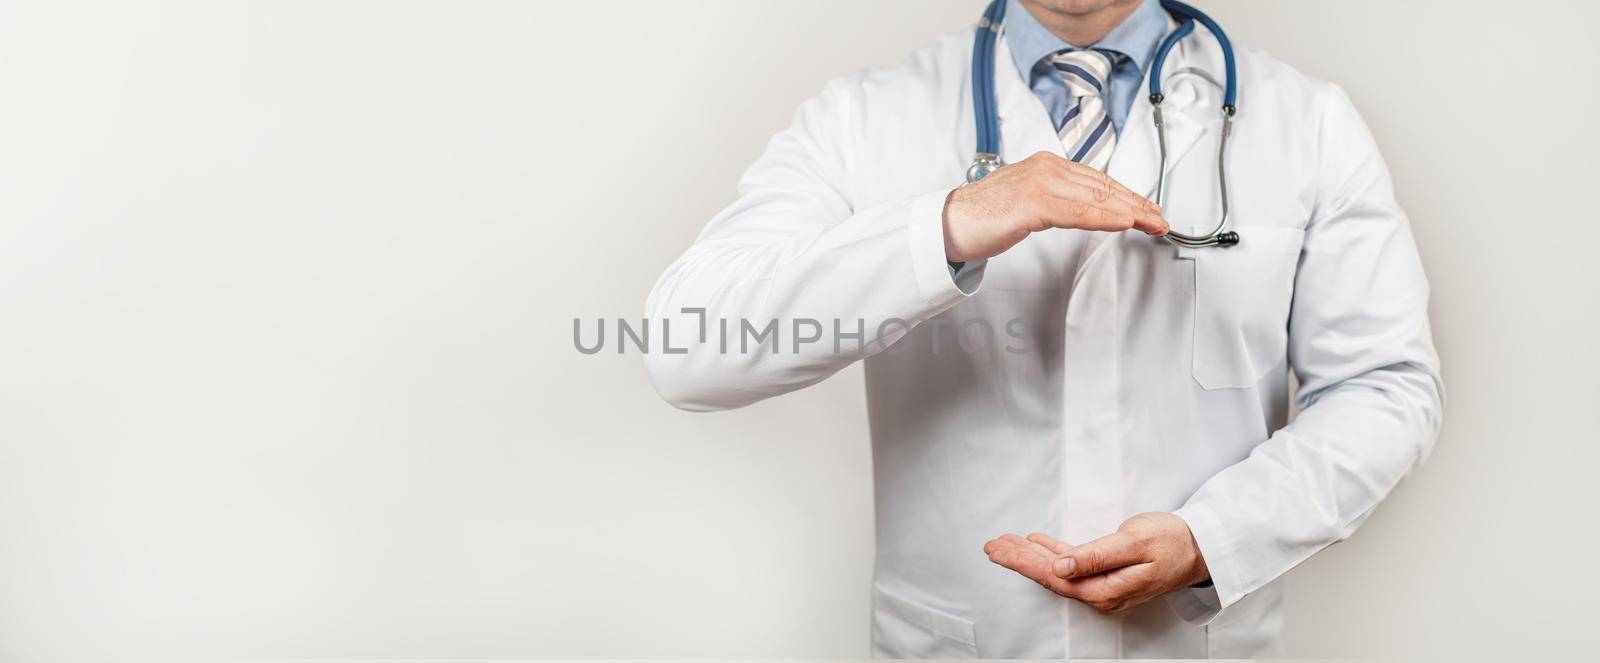 Doctor with two hands gesture health and life insurance for the whole family concept. Practitioner with a protective gesture.